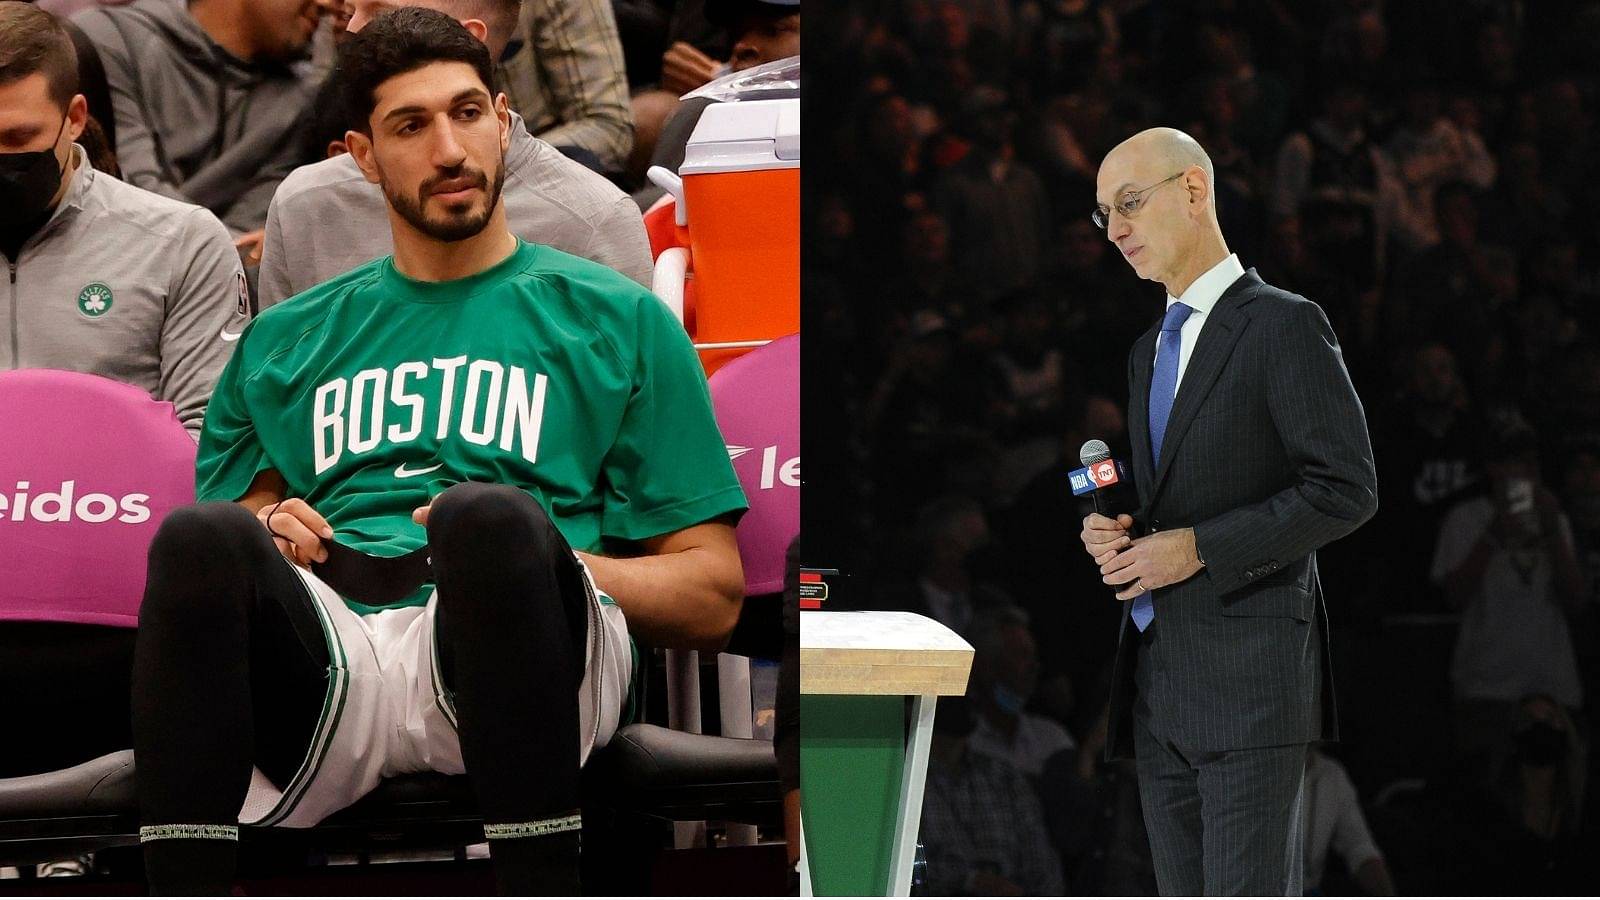 "Enes Kanter Freedom is no Colin Kaepernick!": Adam Silver has his say on former Celtics big man, asks why only NBA is singled out in China row